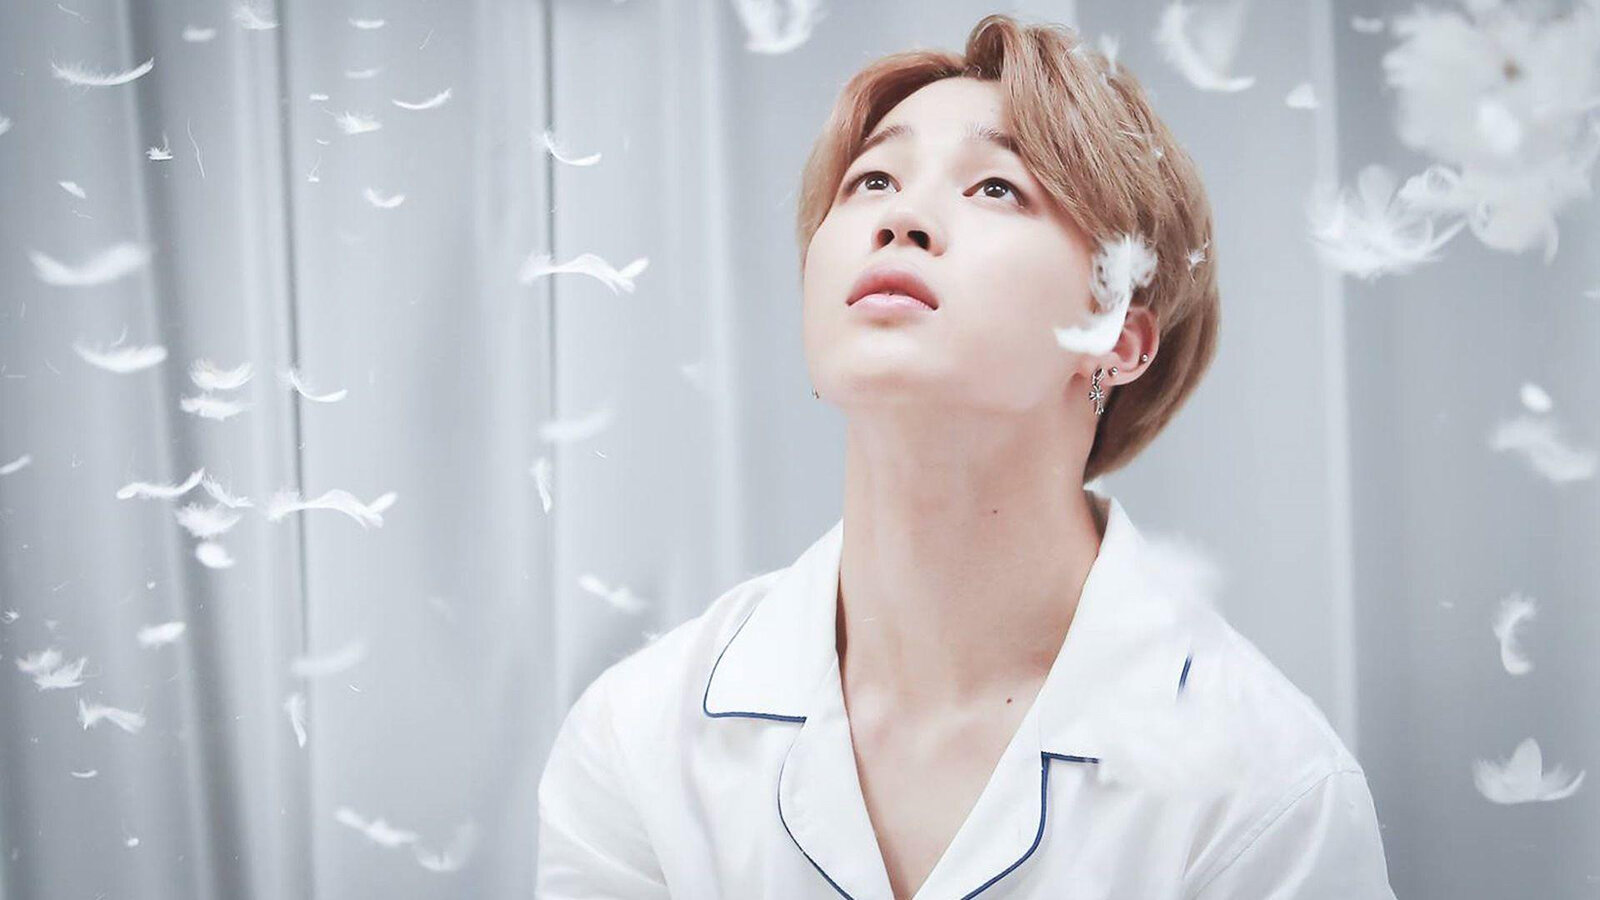 Jimin is an absolute cutie, but are you the perfect cute girl for him? Get to know what Jimin looks for in his ideal girlfriend.